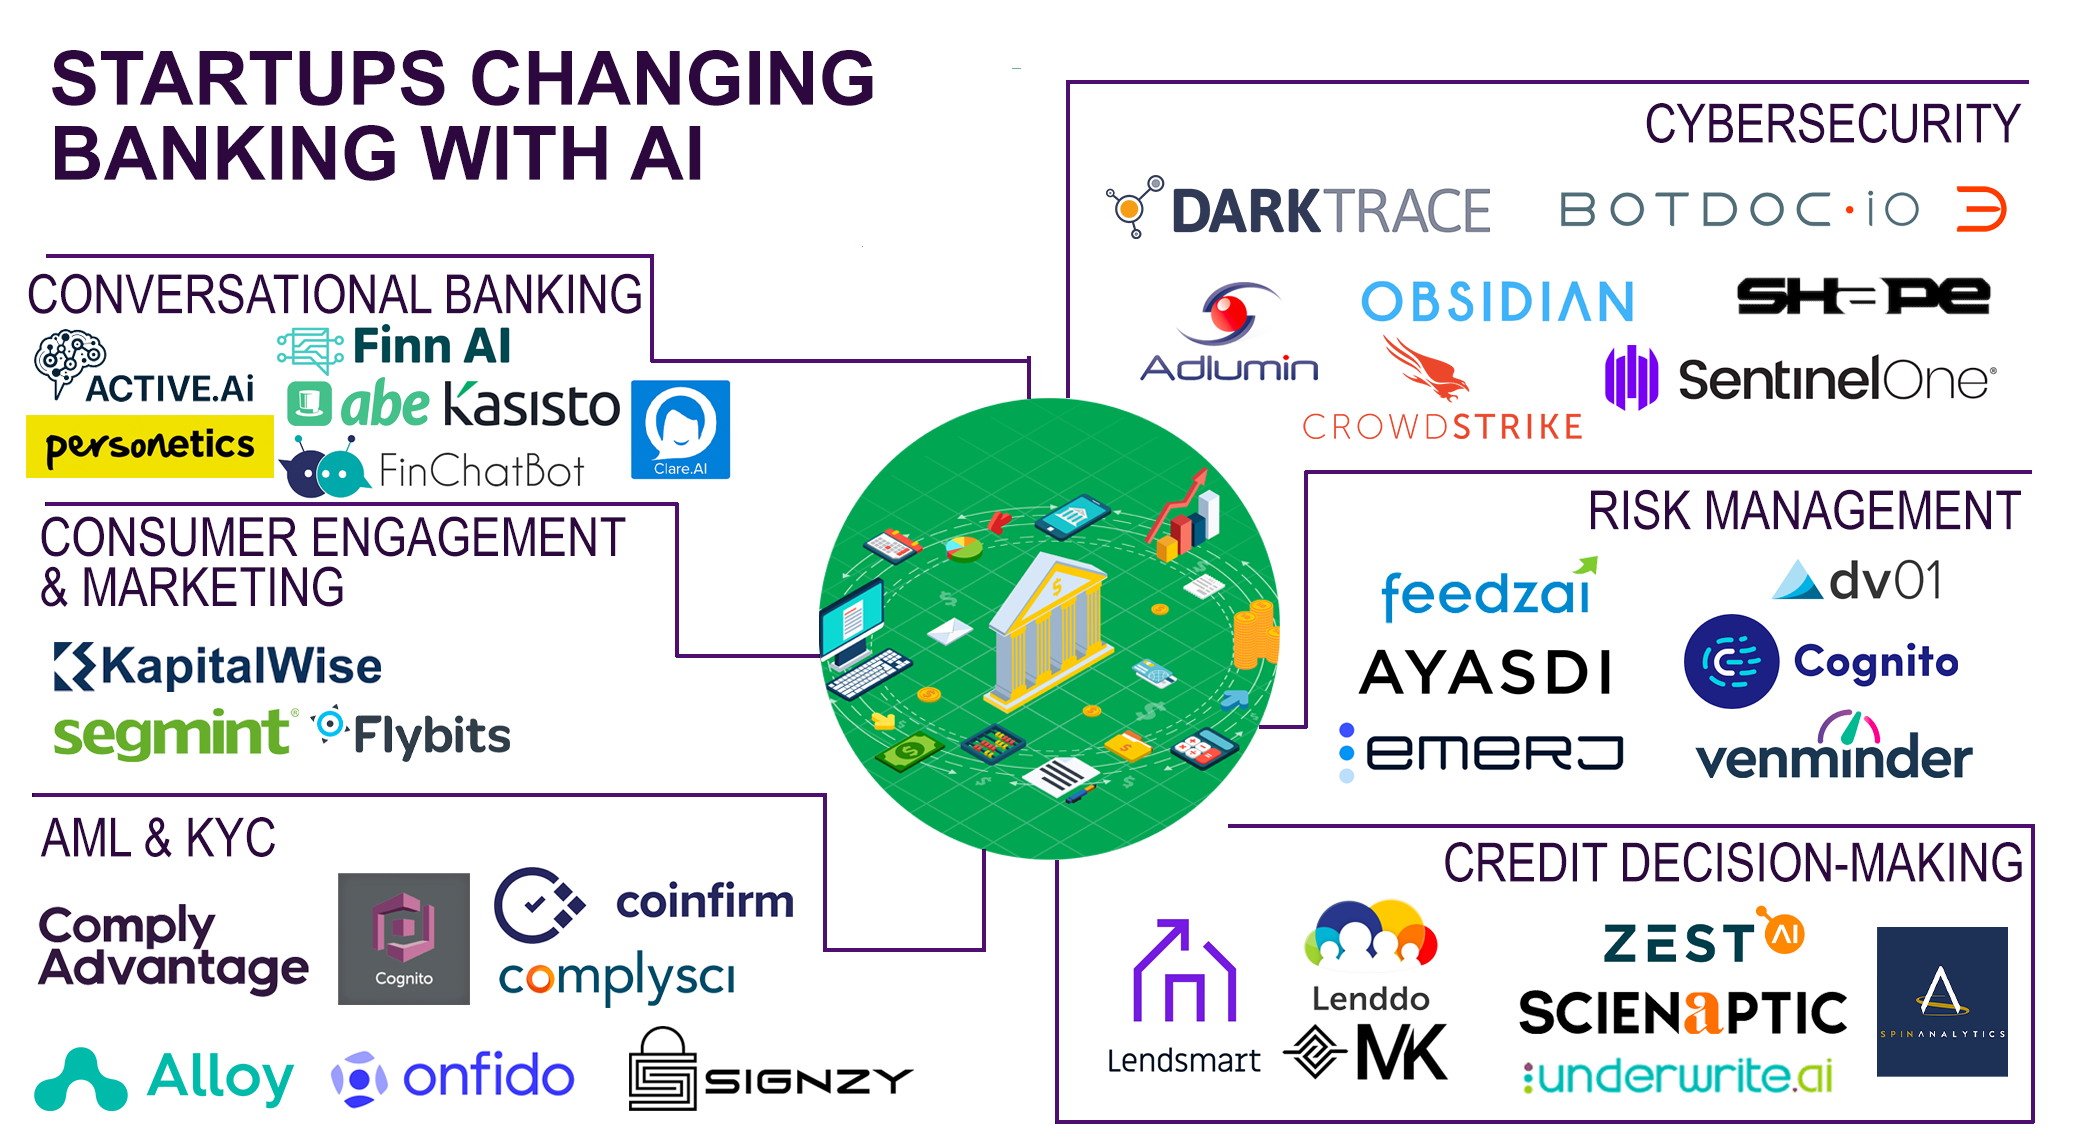 These startup companies are changing banking with AI